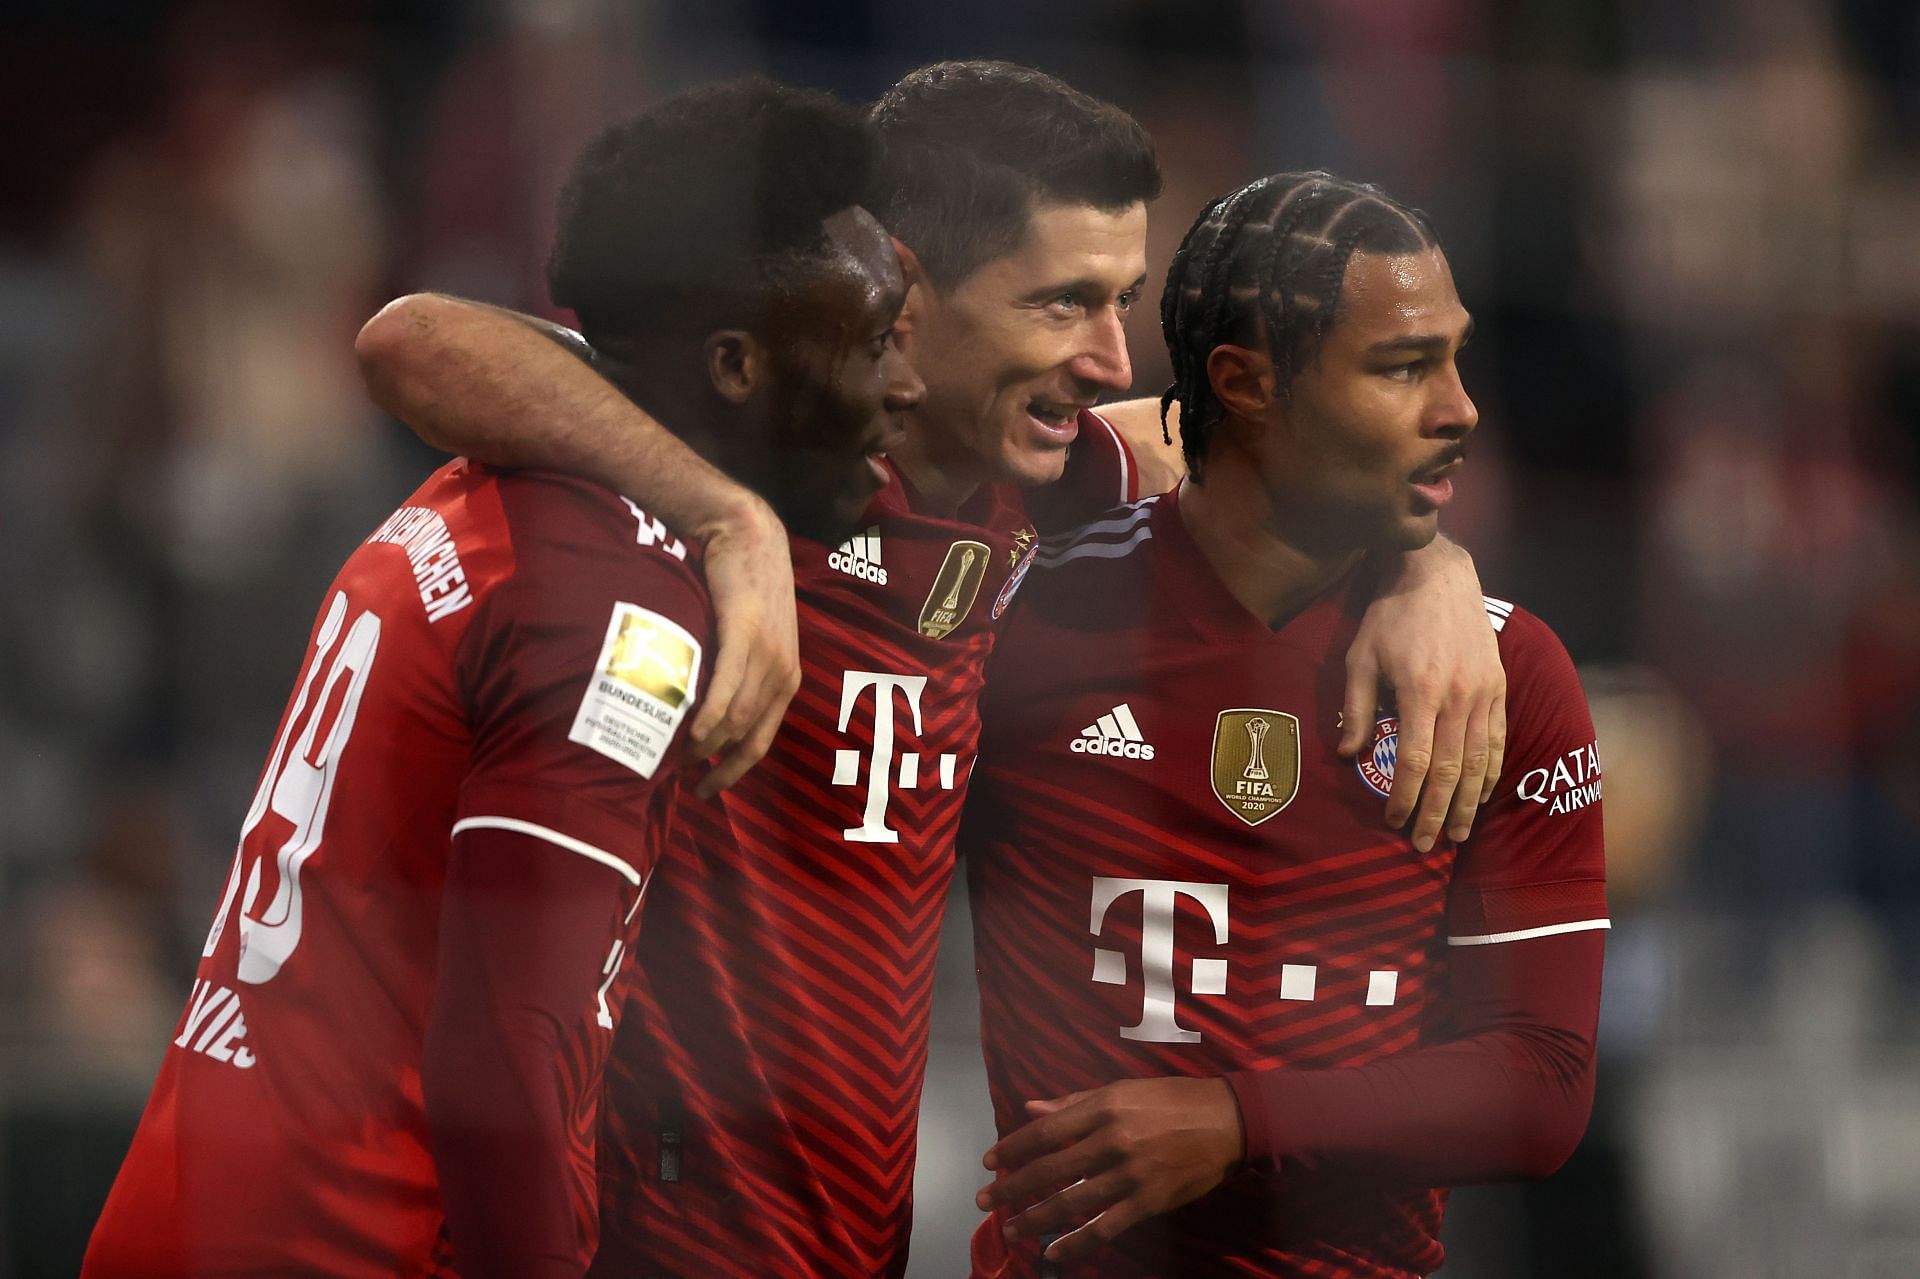 T-Mobile will be a part of the Bavarians&#039; jersey until the end of 2022/23